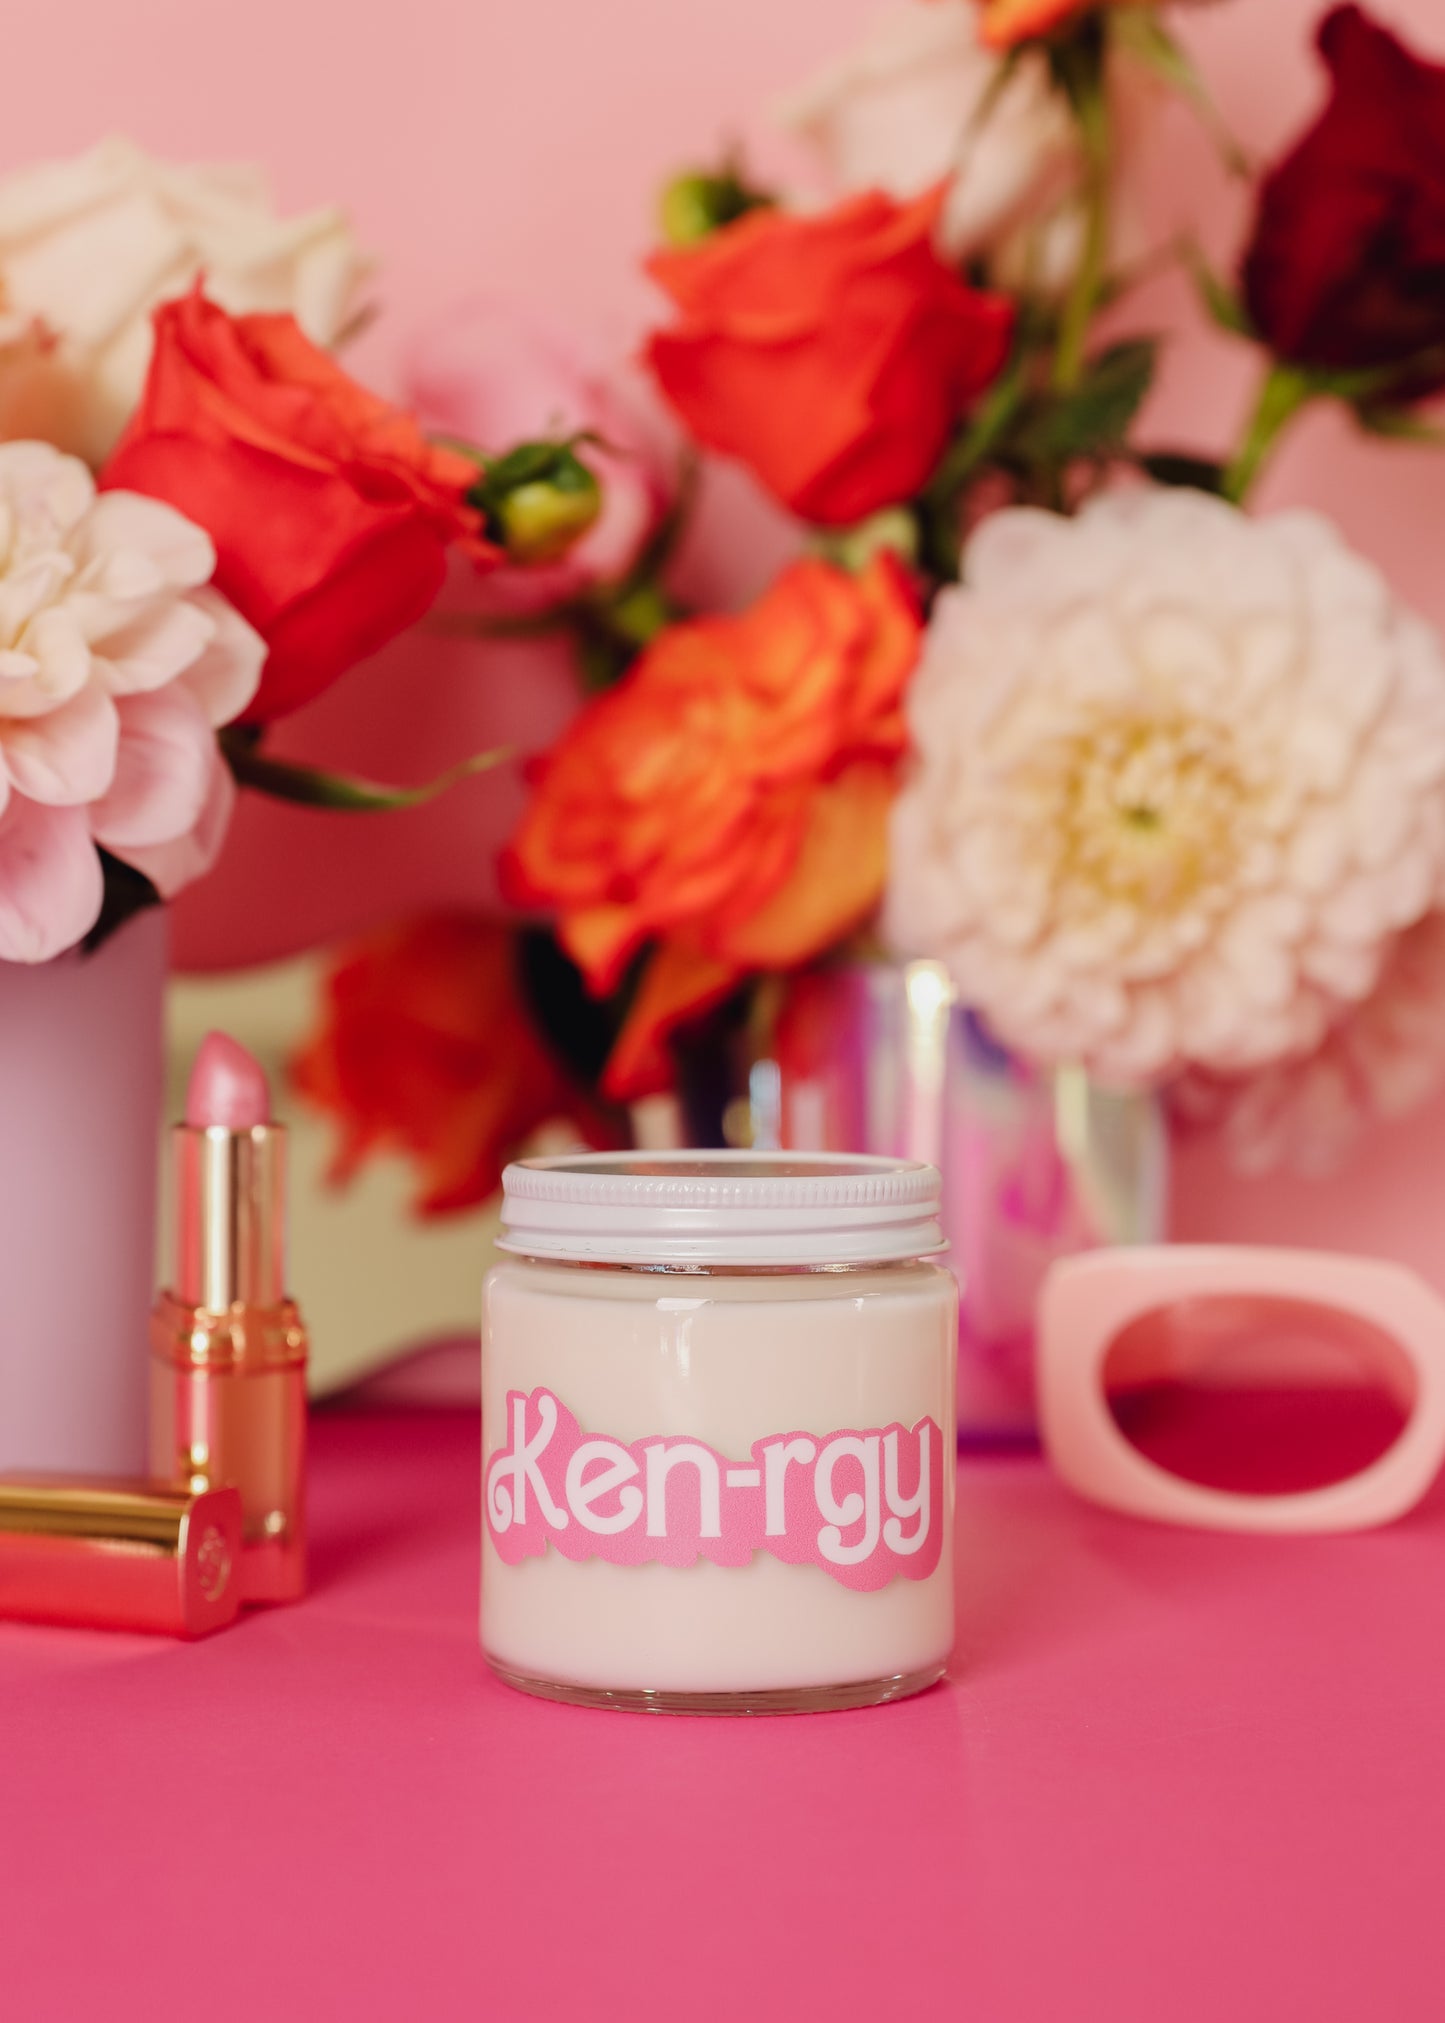 Barbie Inspired Ken-rgy - Cream Candle